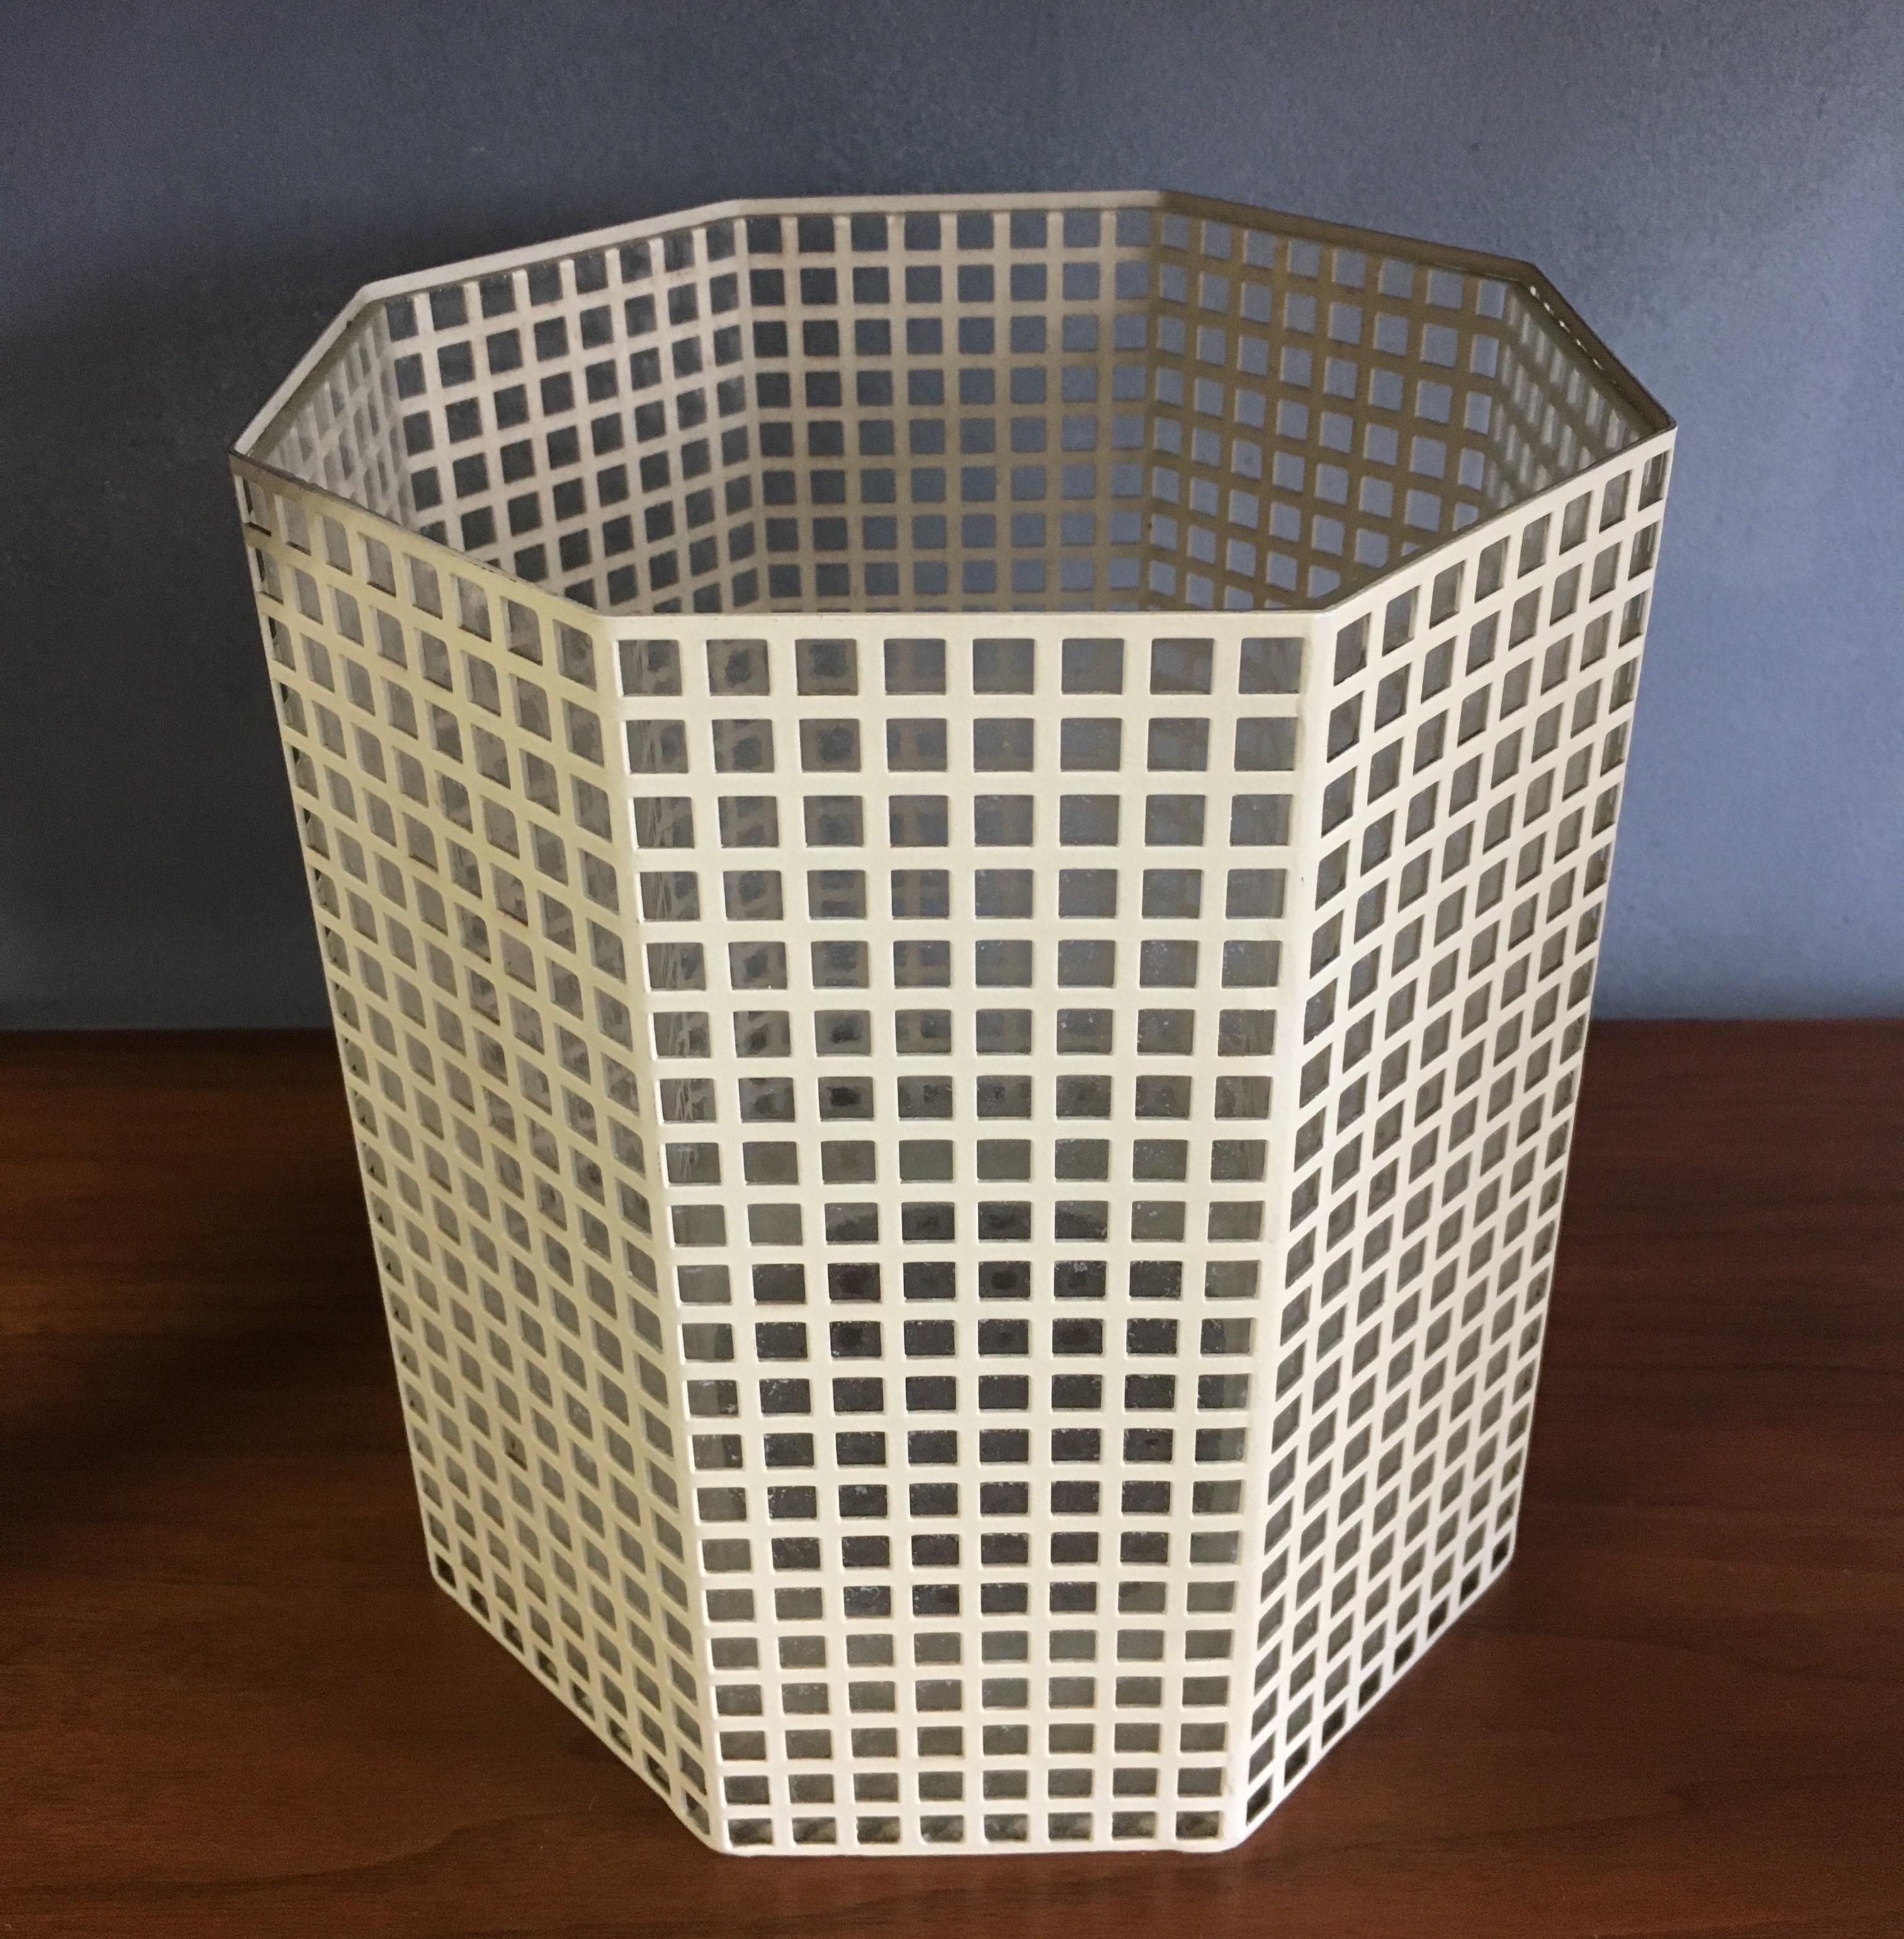 Elegant and strikingly minimal Bauhaus designs by Josef Hoffmann. The vase height is 8 1/2 inches high the width is 7 1/2 inches From largest point) wide with minor flea bite chips to the top of the glass. Showing very little use. Two available.